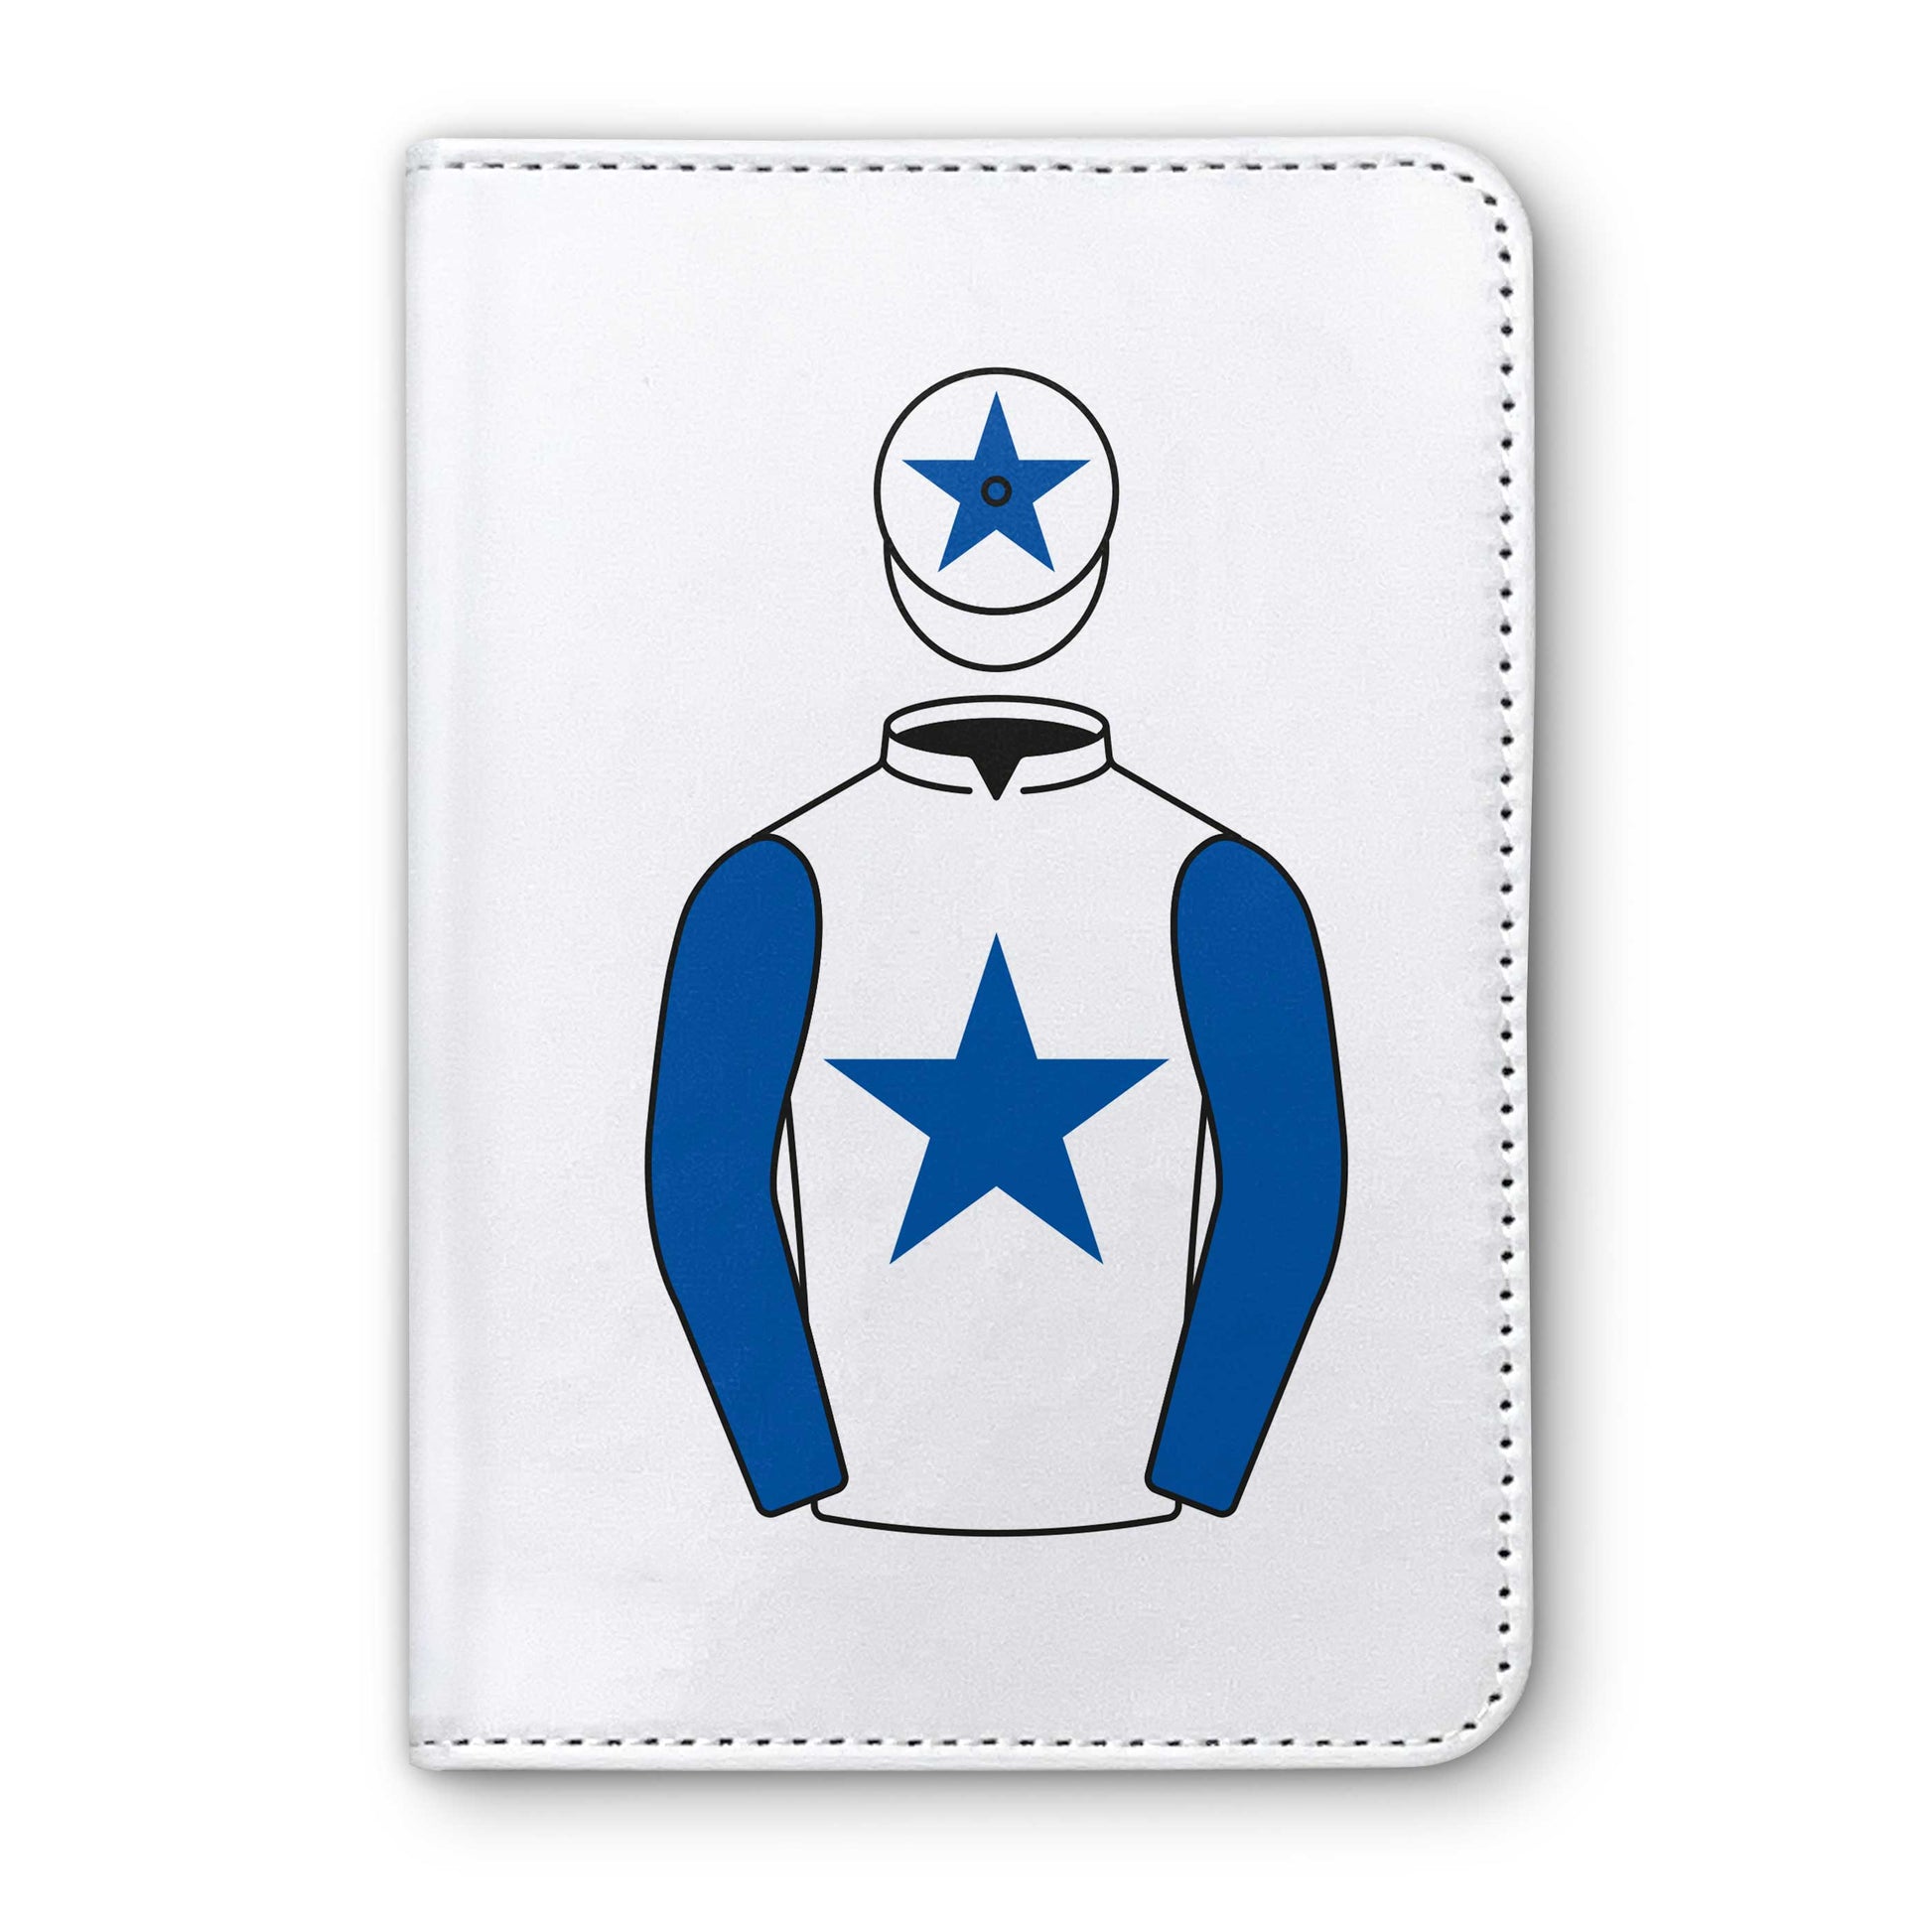 Direct Bloodstock Limited  Horse Racing Passport Holder - Hacked Up Horse Racing Gifts